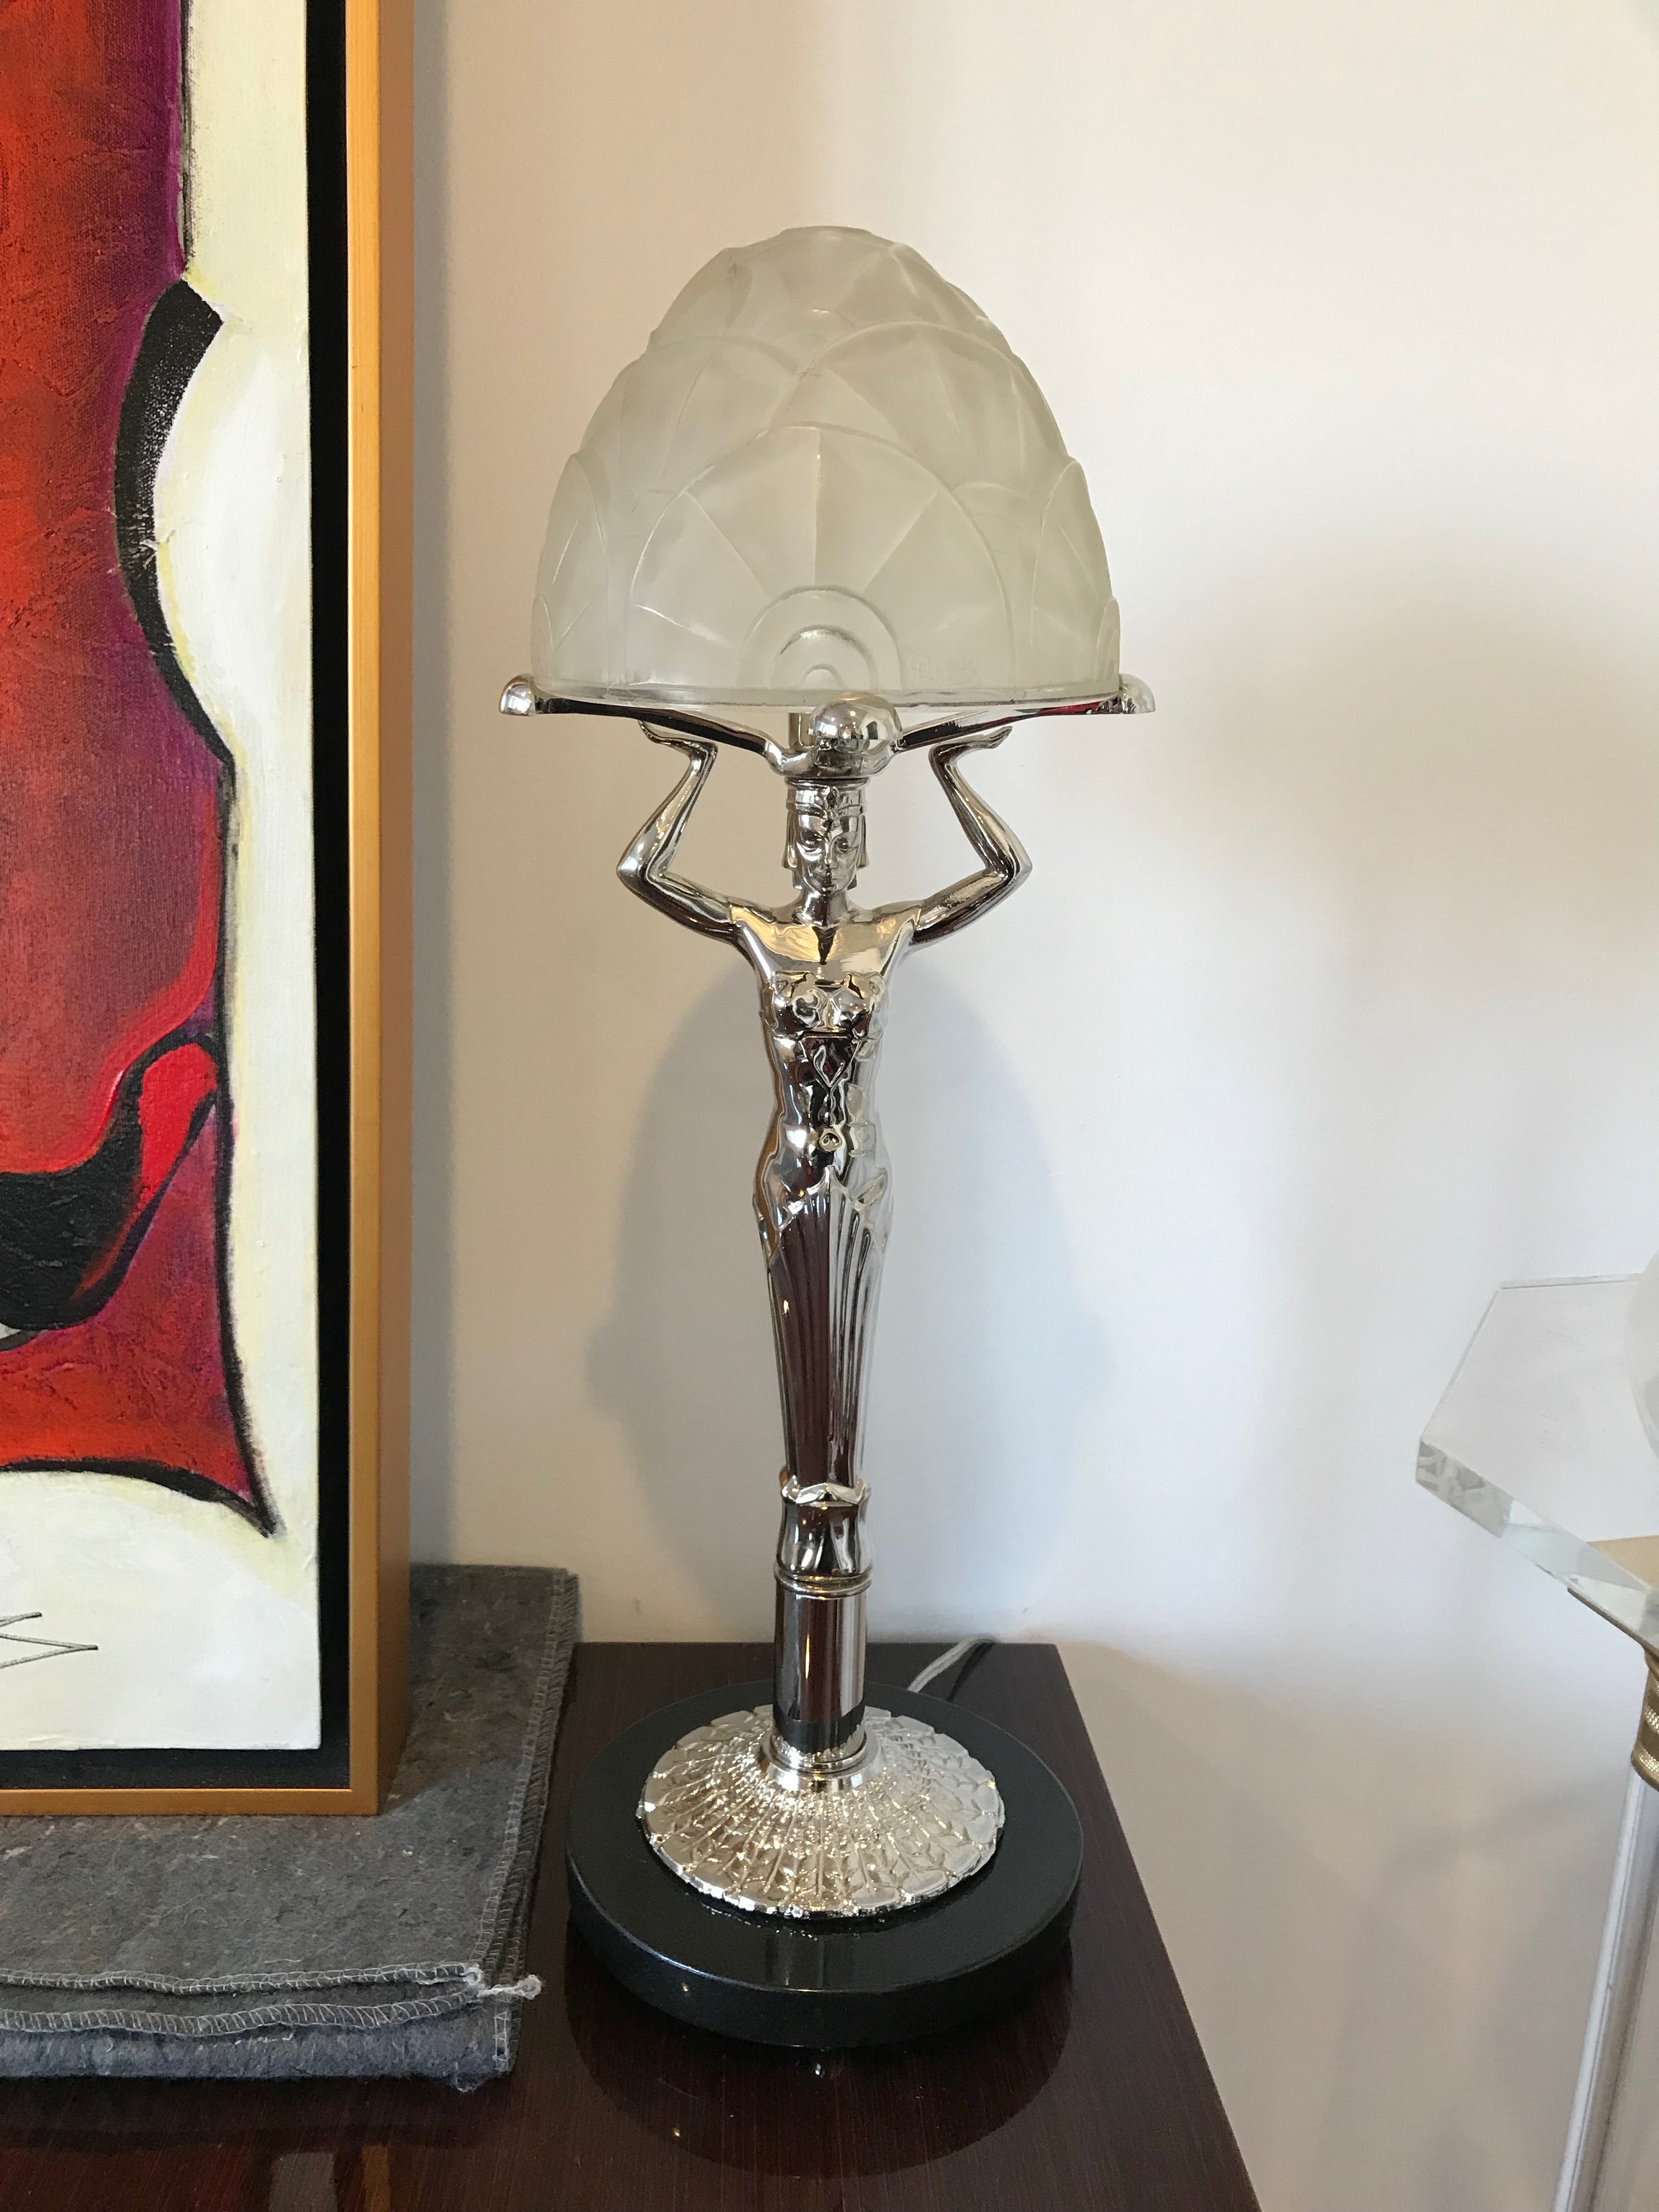 French Art Deco figurative Table Lamp by Degue – 1 of Kind NJ